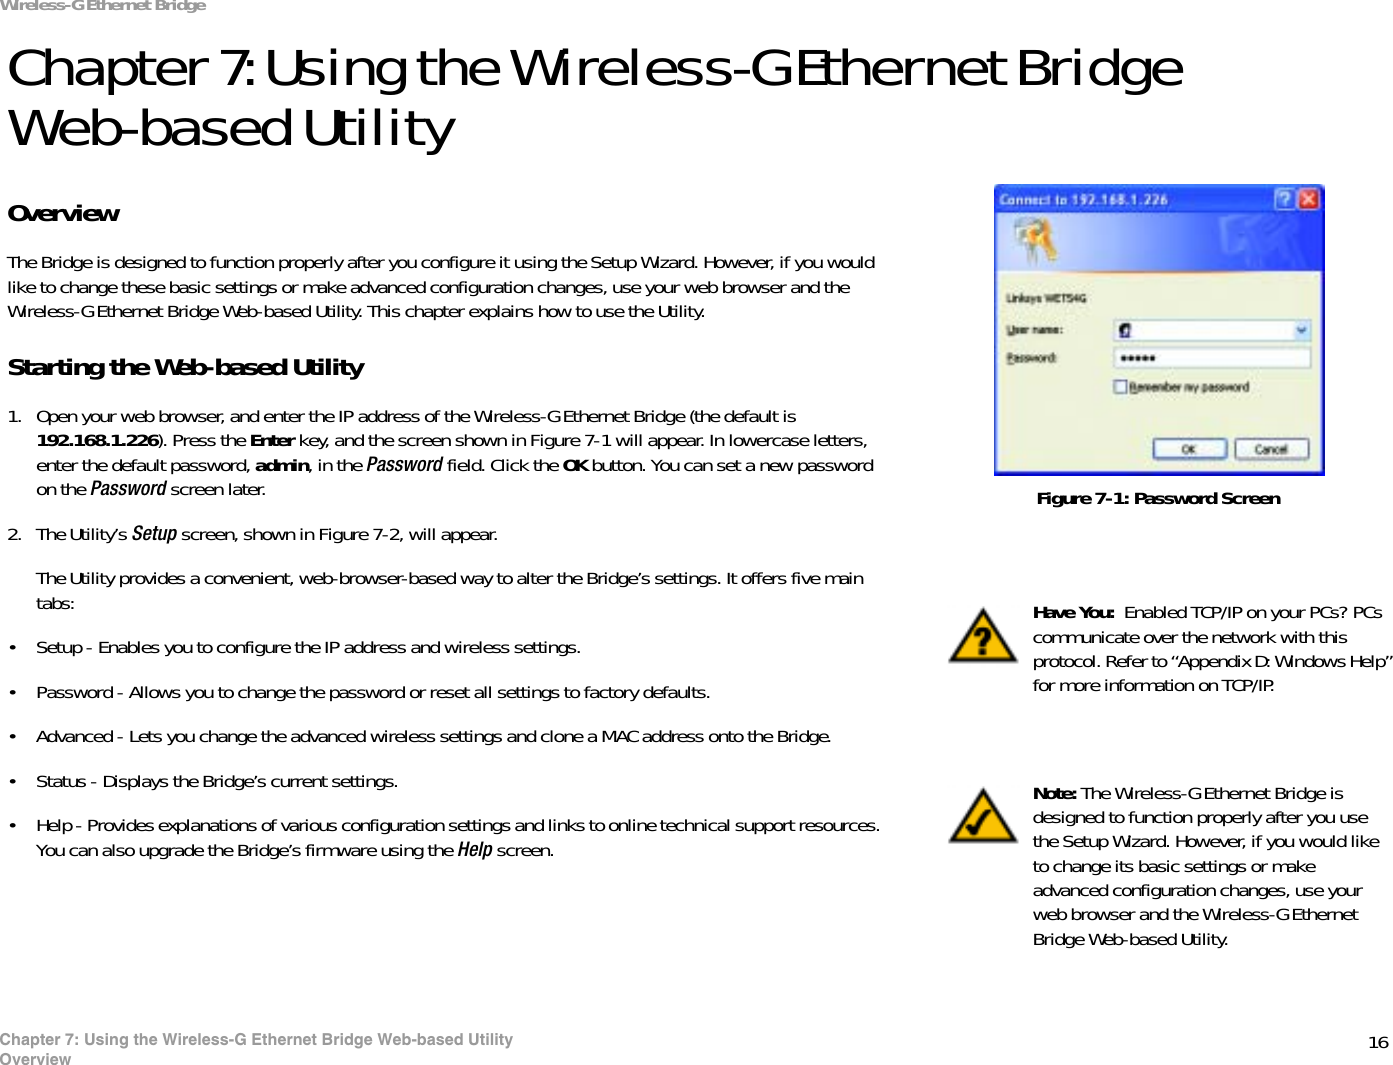 16Chapter 7: Using the Wireless-G Ethernet Bridge Web-based UtilityOverviewWireless-G Ethernet BridgeChapter 7: Using the Wireless-G Ethernet Bridge Web-based UtilityOverviewThe Bridge is designed to function properly after you configure it using the Setup Wizard. However, if you would like to change these basic settings or make advanced configuration changes, use your web browser and the Wireless-G Ethernet Bridge Web-based Utility. This chapter explains how to use the Utility.Starting the Web-based Utility1. Open your web browser, and enter the IP address of the Wireless-G Ethernet Bridge (the default is 192.168.1.226). Press the Enter key, and the screen shown in Figure 7-1 will appear. In lowercase letters, enter the default password, admin, in the Password field. Click the OK button. You can set a new password on the Password screen later.2. The Utility’s Setup screen, shown in Figure 7-2, will appear. The Utility provides a convenient, web-browser-based way to alter the Bridge’s settings. It offers five main tabs:• Setup - Enables you to configure the IP address and wireless settings.• Password - Allows you to change the password or reset all settings to factory defaults.• Advanced - Lets you change the advanced wireless settings and clone a MAC address onto the Bridge.• Status - Displays the Bridge’s current settings.• Help - Provides explanations of various configuration settings and links to online technical support resources. You can also upgrade the Bridge’s firmware using the Help screen.Have You:  Enabled TCP/IP on your PCs? PCs communicate over the network with this protocol. Refer to “Appendix D: Windows Help” for more information on TCP/IP.Note: The Wireless-G Ethernet Bridge is designed to function properly after you use the Setup Wizard. However, if you would like to change its basic settings or make advanced configuration changes, use your web browser and the Wireless-G Ethernet Bridge Web-based Utility. Figure 7-1: Password Screen